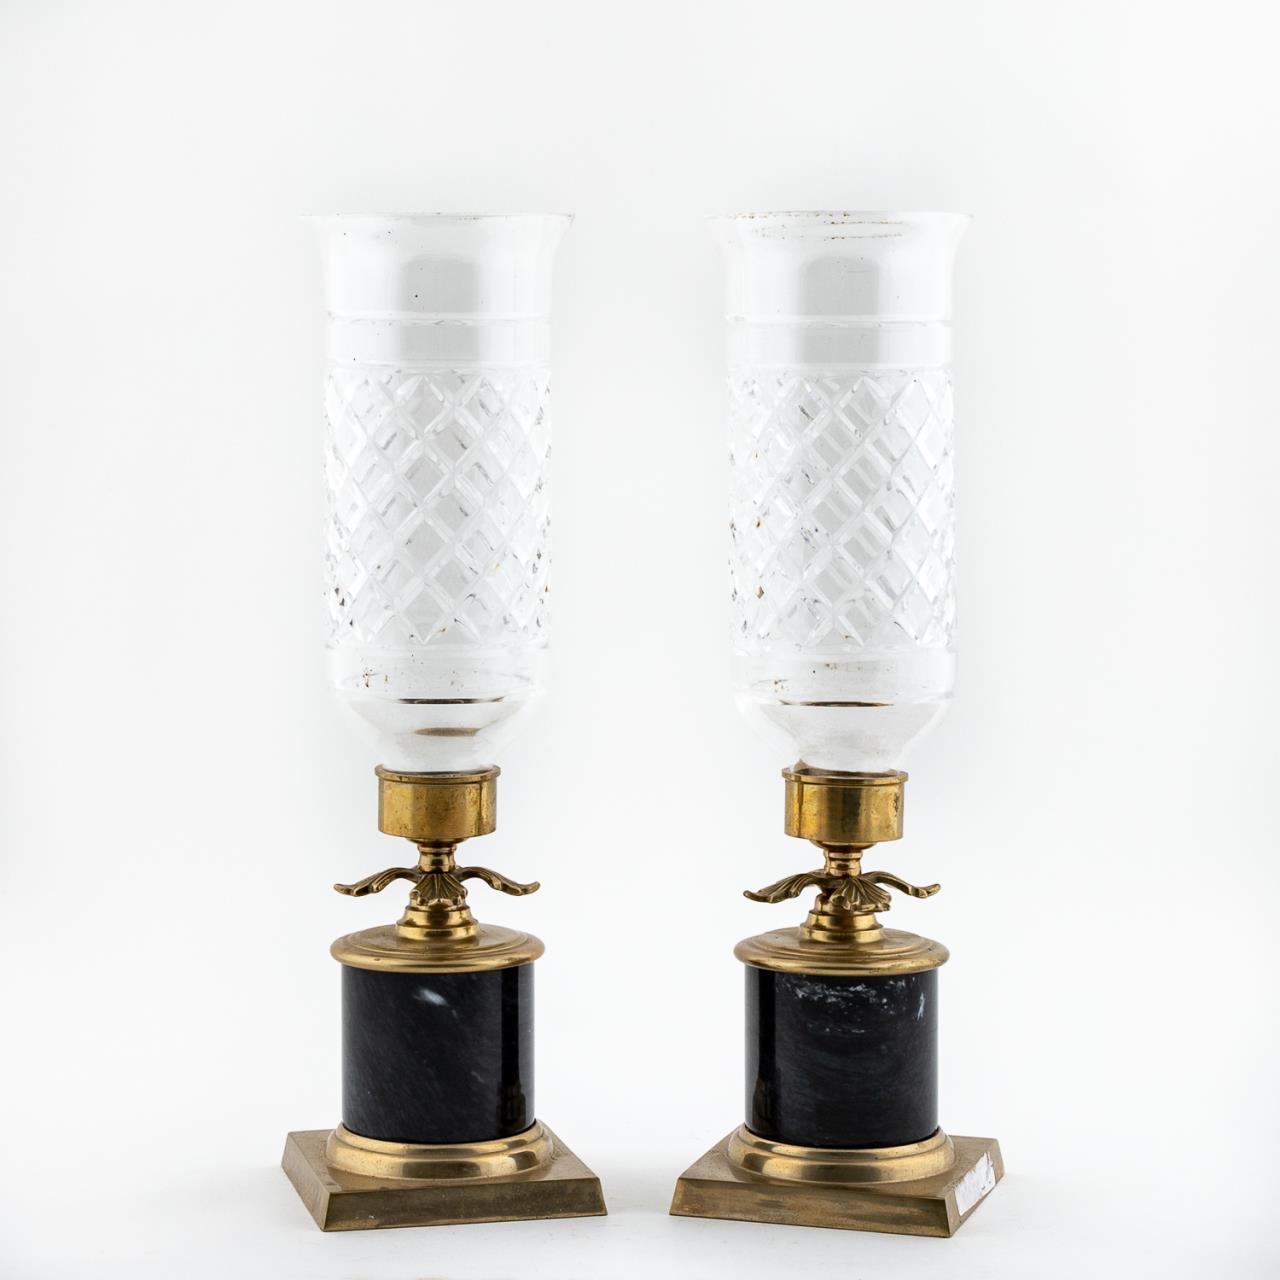 PAIR CONTINENTAL BRASS AND MARBLE